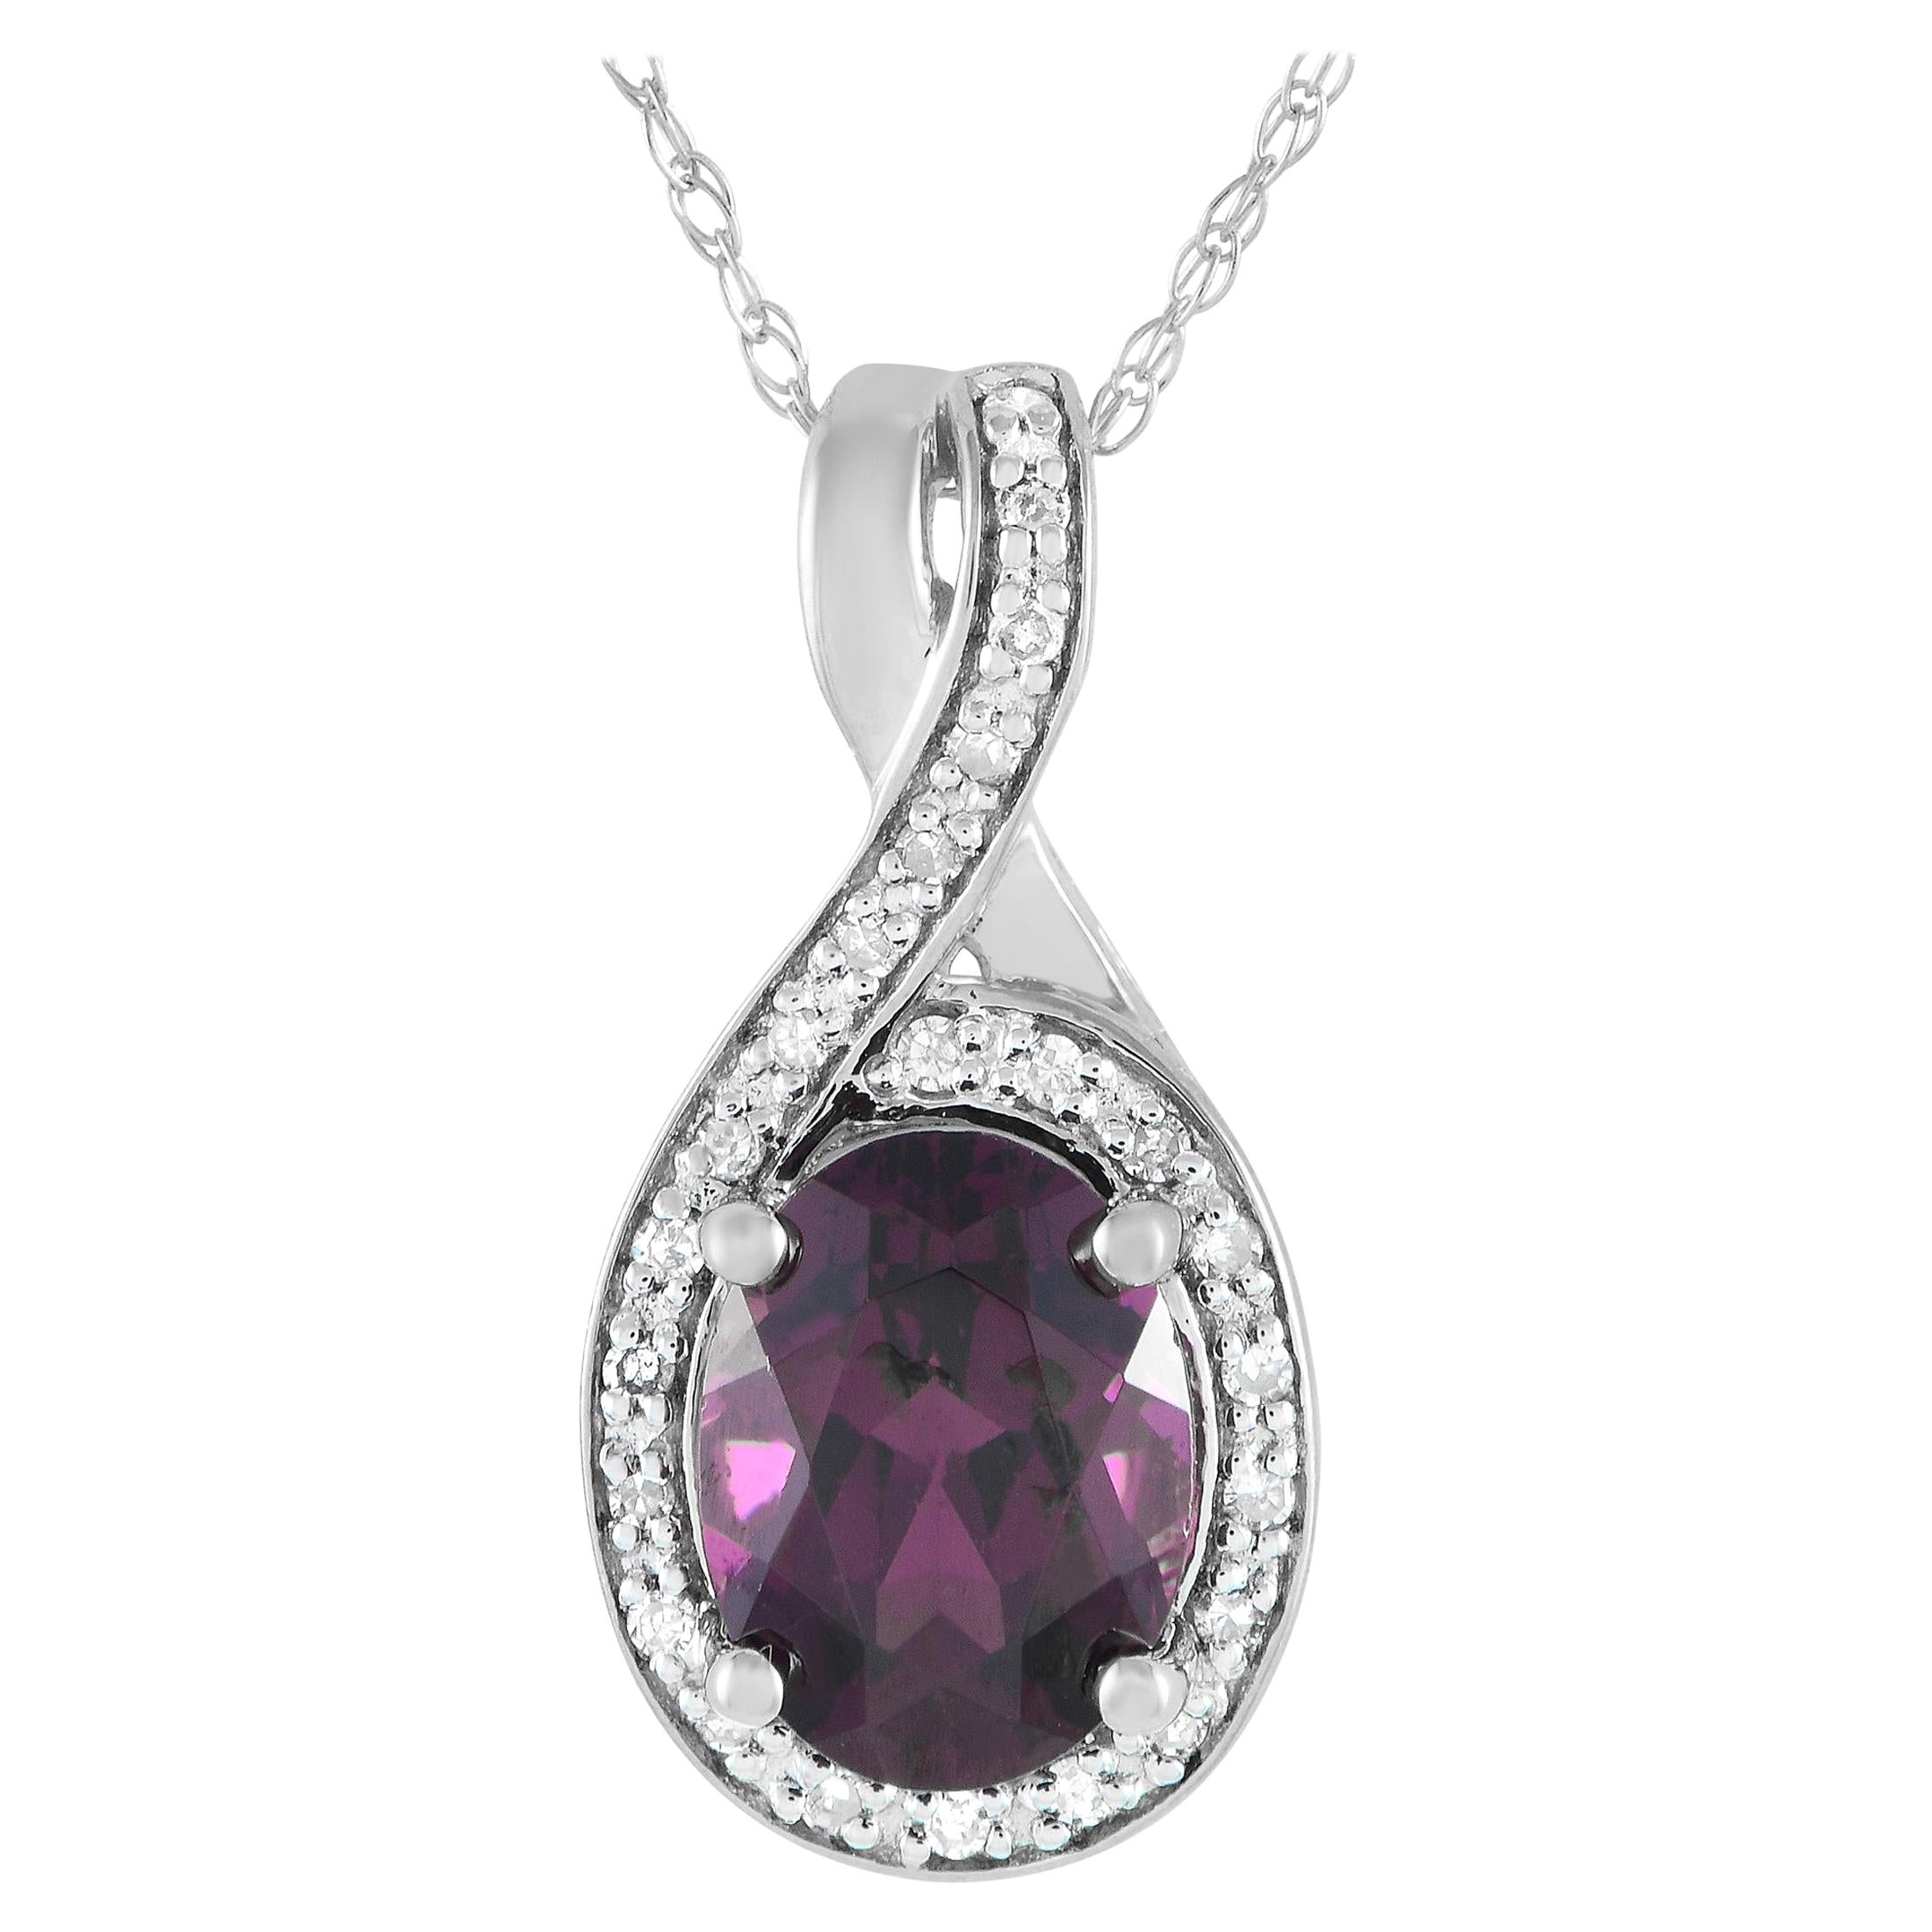 LB Exclusive 14K White Gold 0.11ct Diamond and Garnet Necklace PD4-16268WGA For Sale